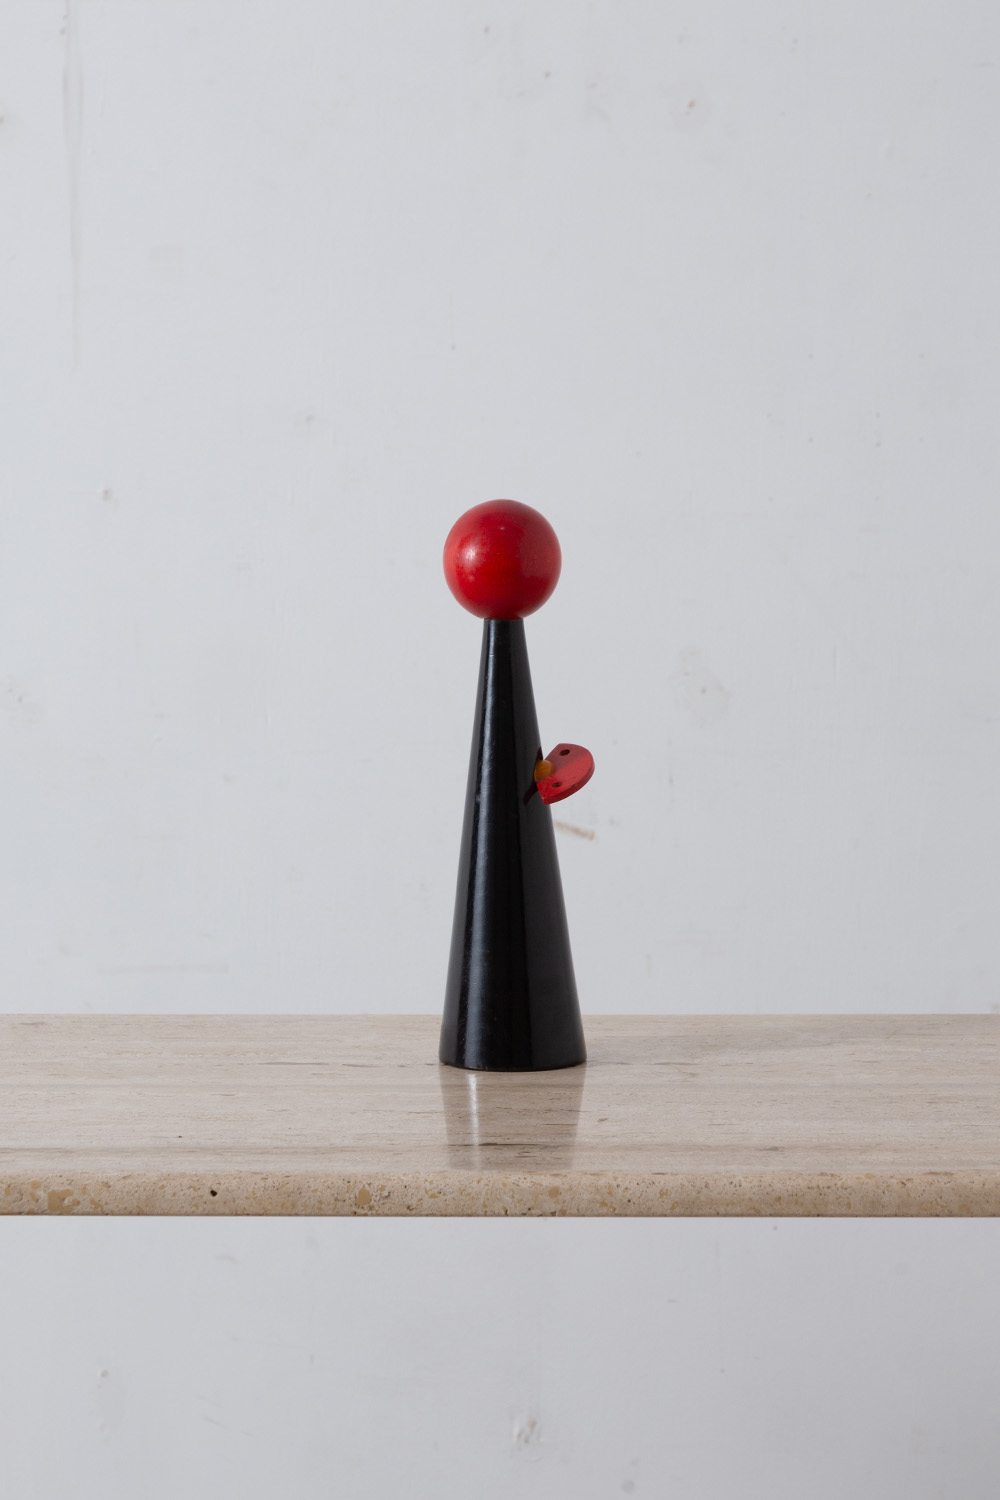 Pepper Mill ‘Accademia’ Series by Matteo Thun for Lagostina